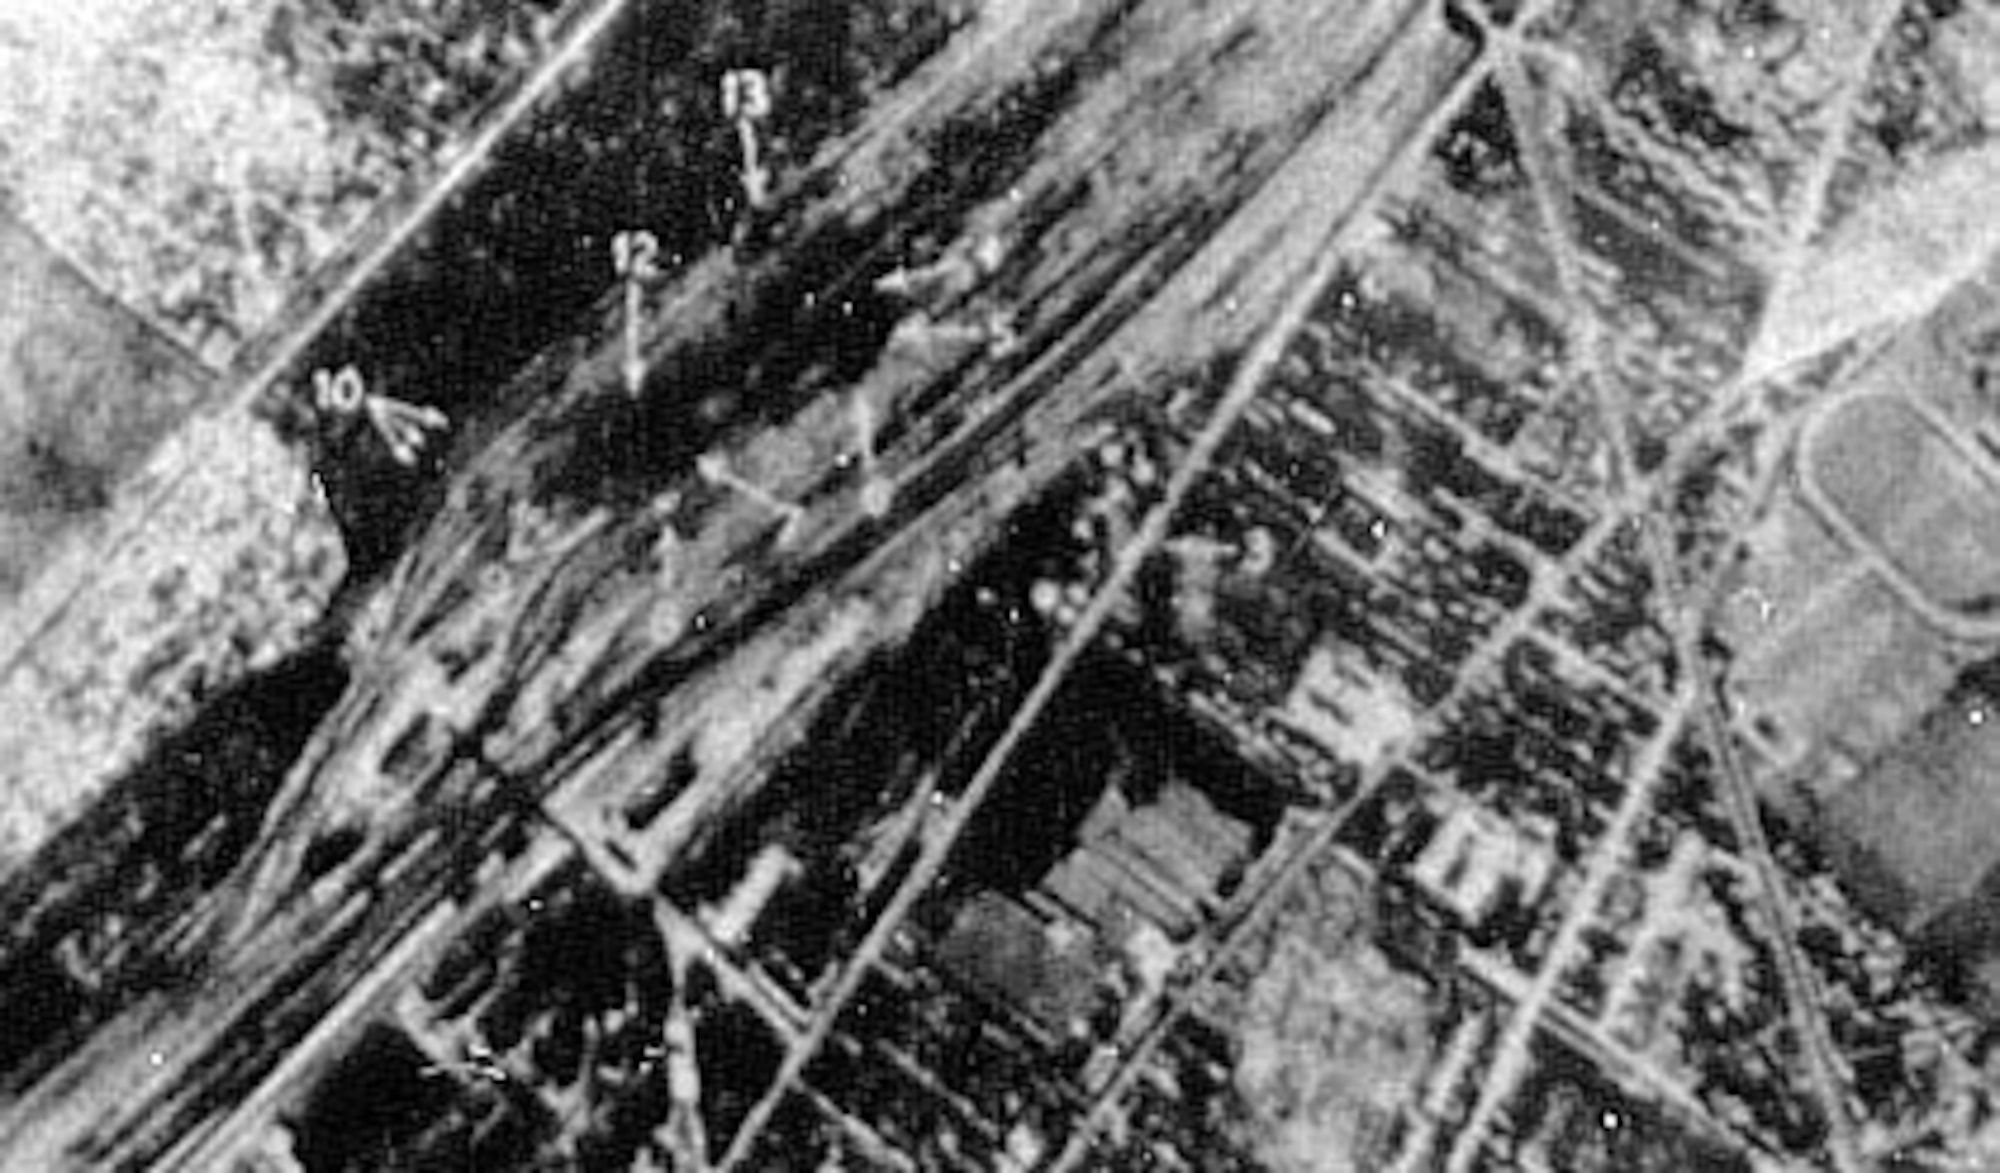 The Sotteville railroad yards at Rouen, France, were attacked in August 1942. (U.S. Air Force photo)